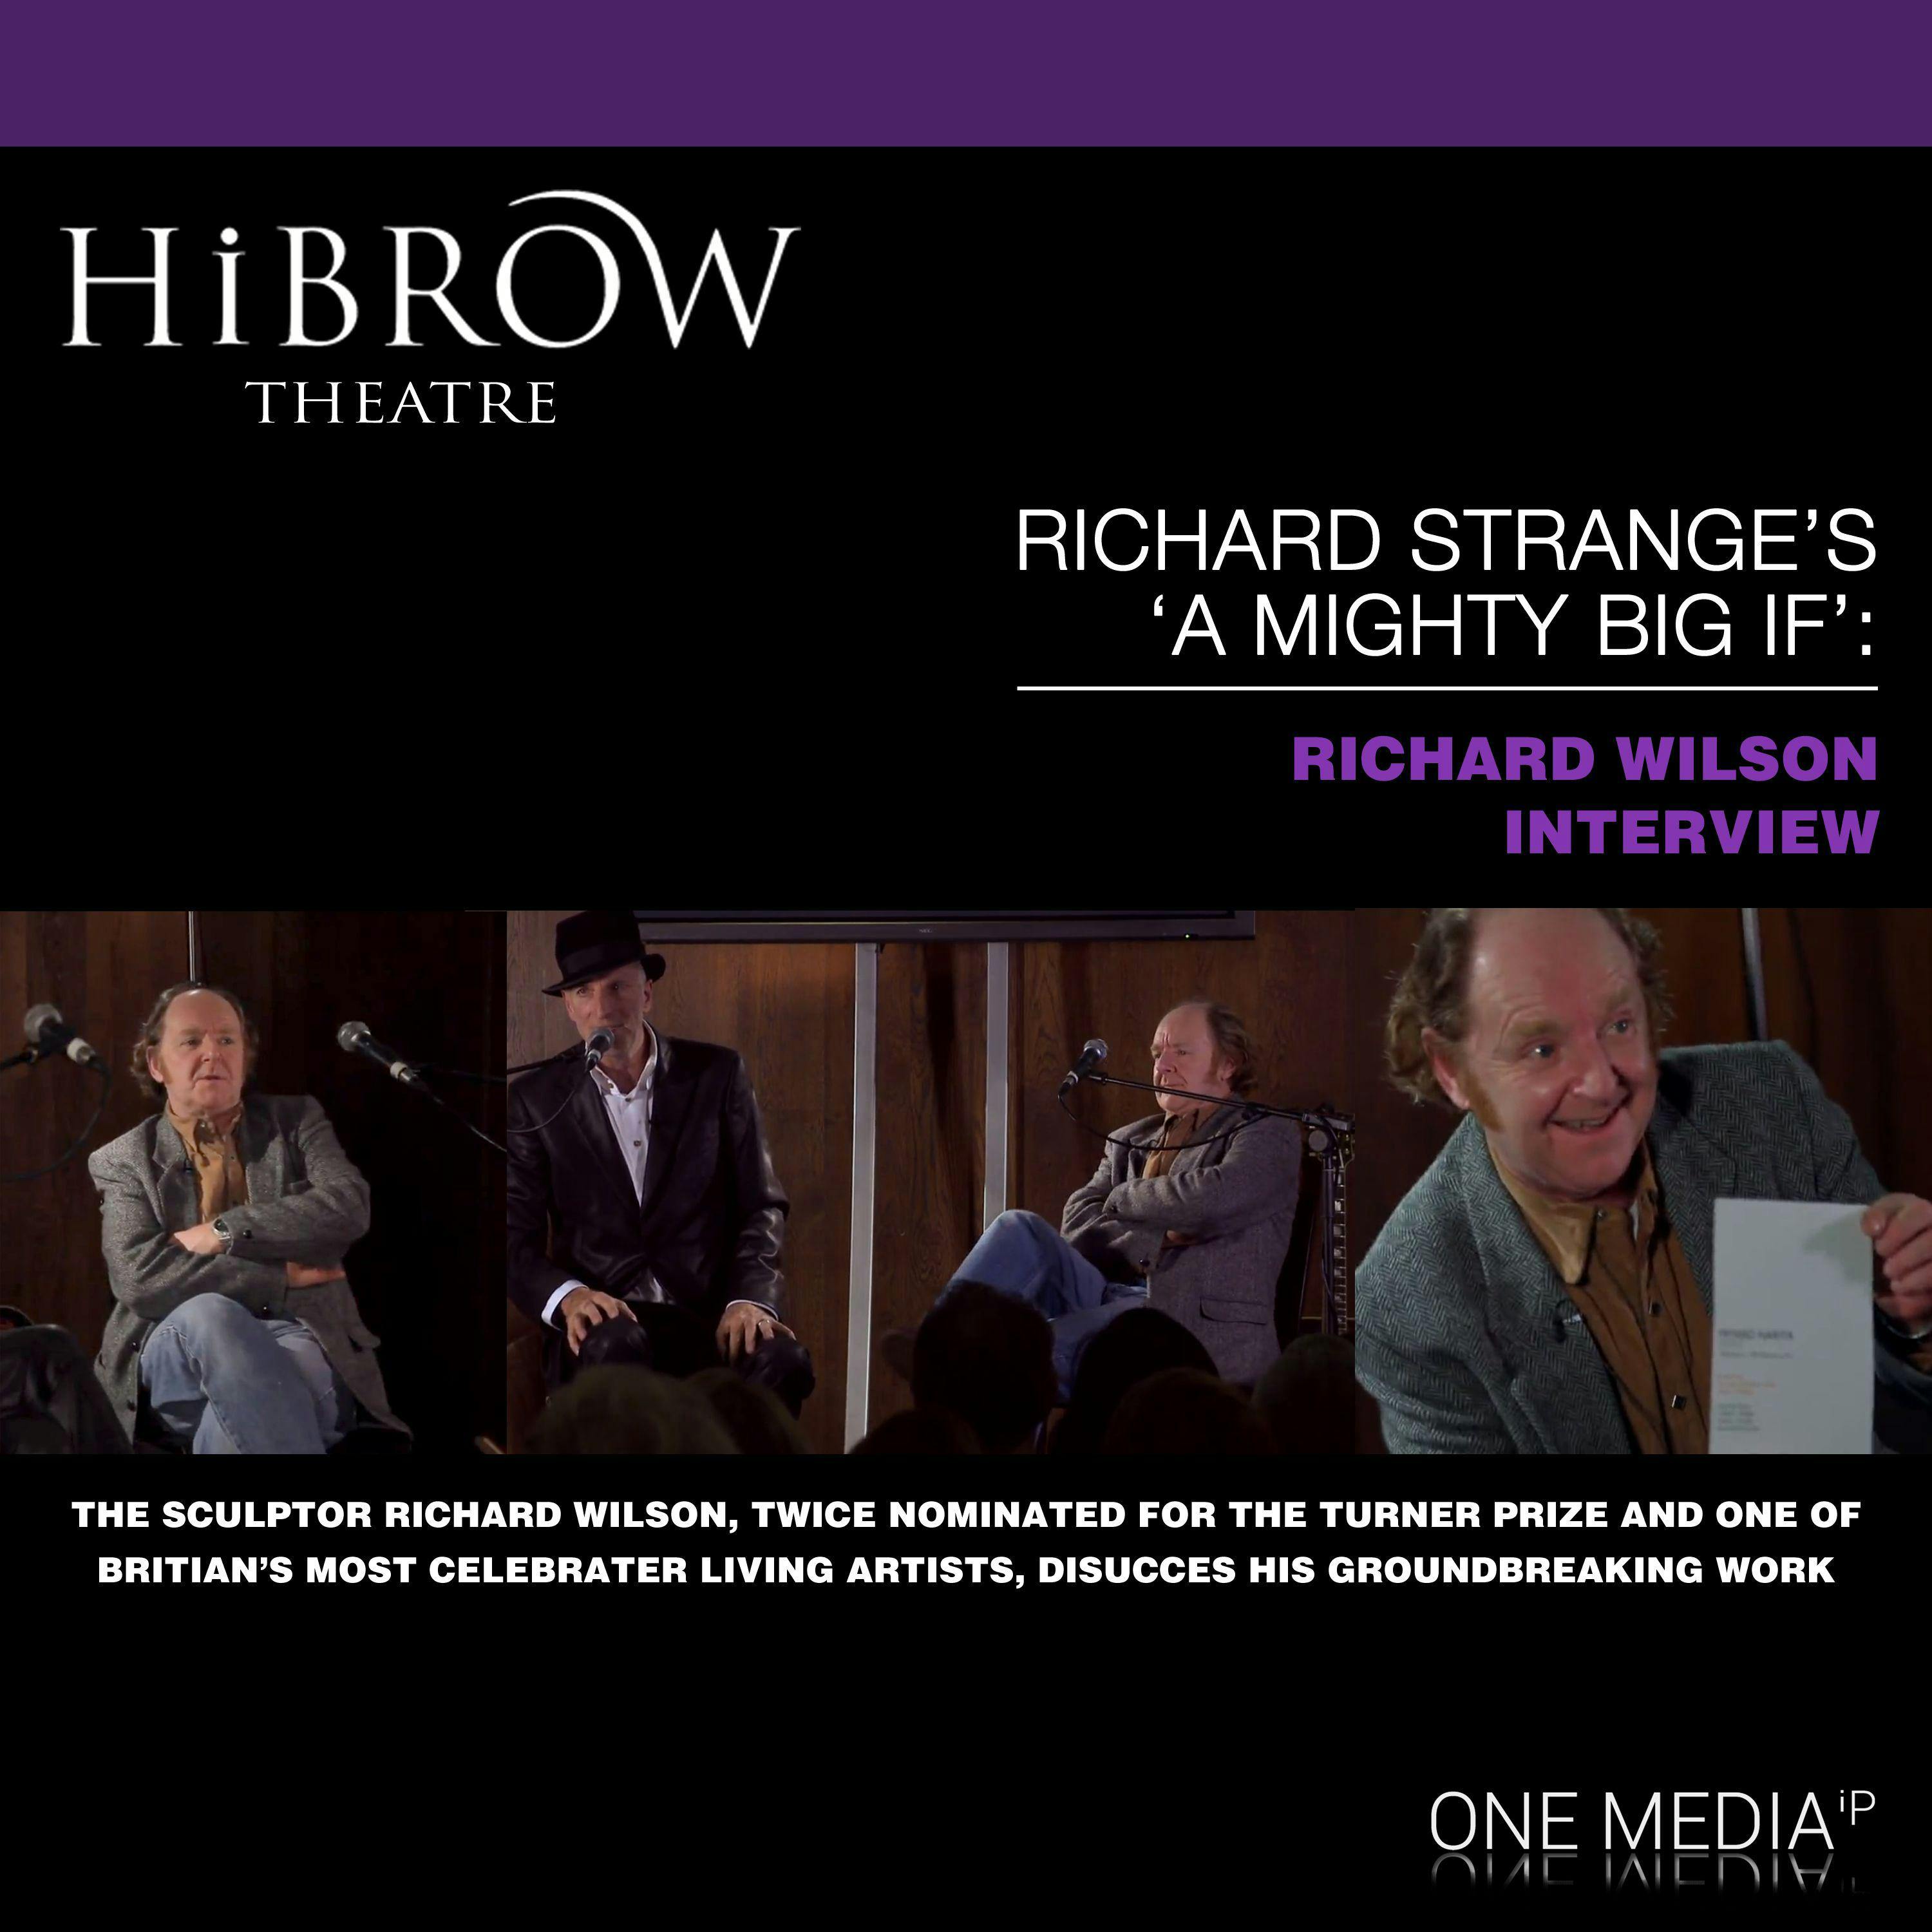 HiBrow: Richard Strange's "A Mighty Big If" with Richard Wilson - Richard Strange, Richard Wilson